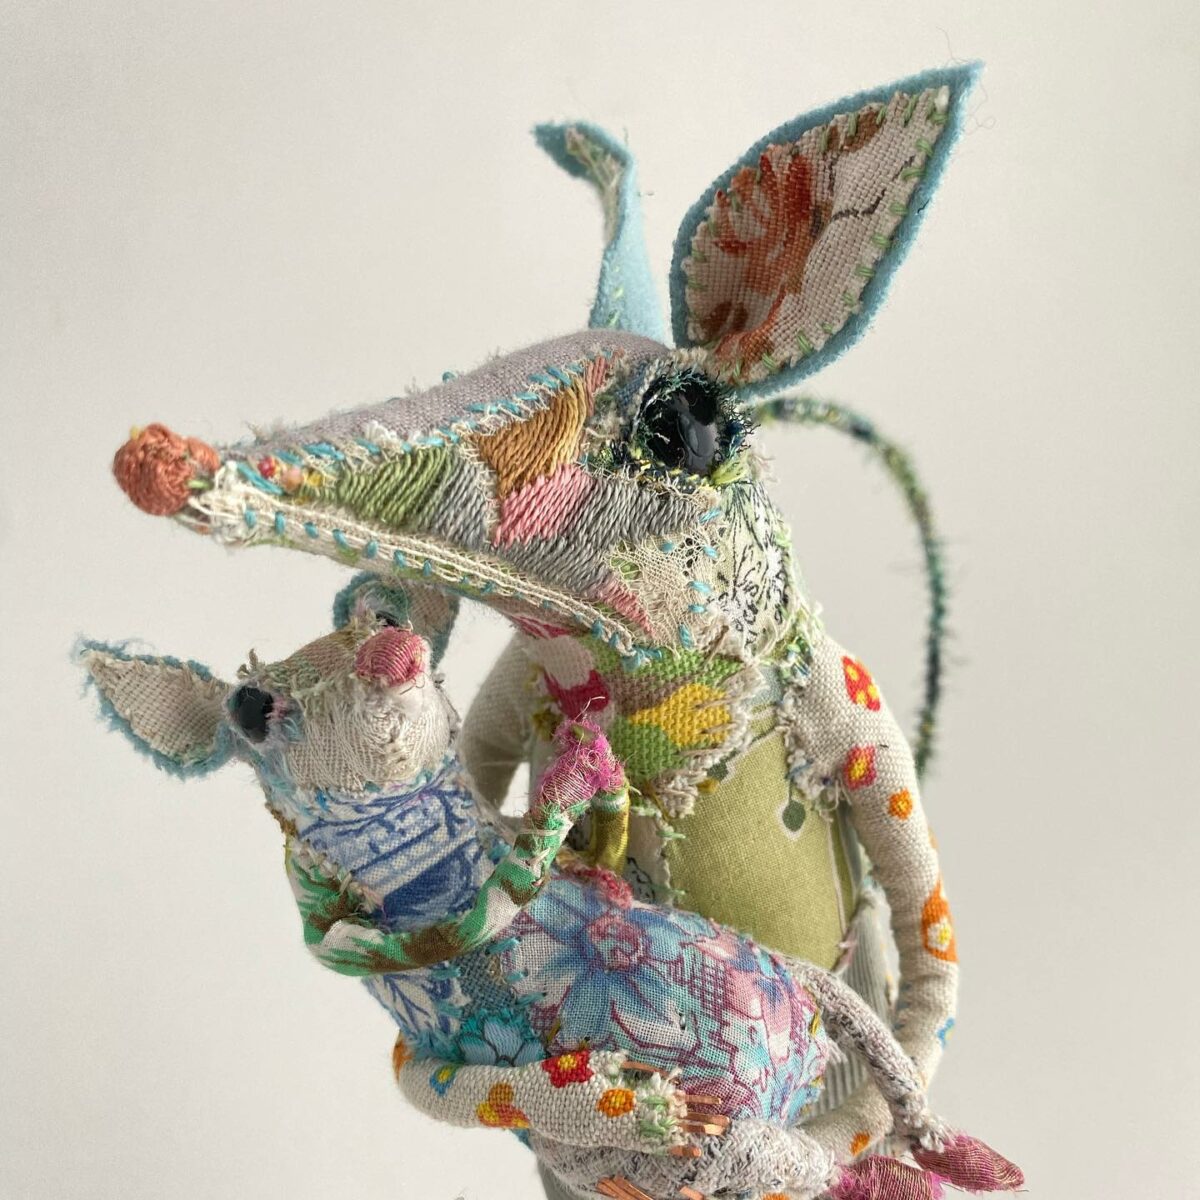 Pretty Scruffy Enchanting Animal Textile Sculptures By Bryony Rose Jennings 5